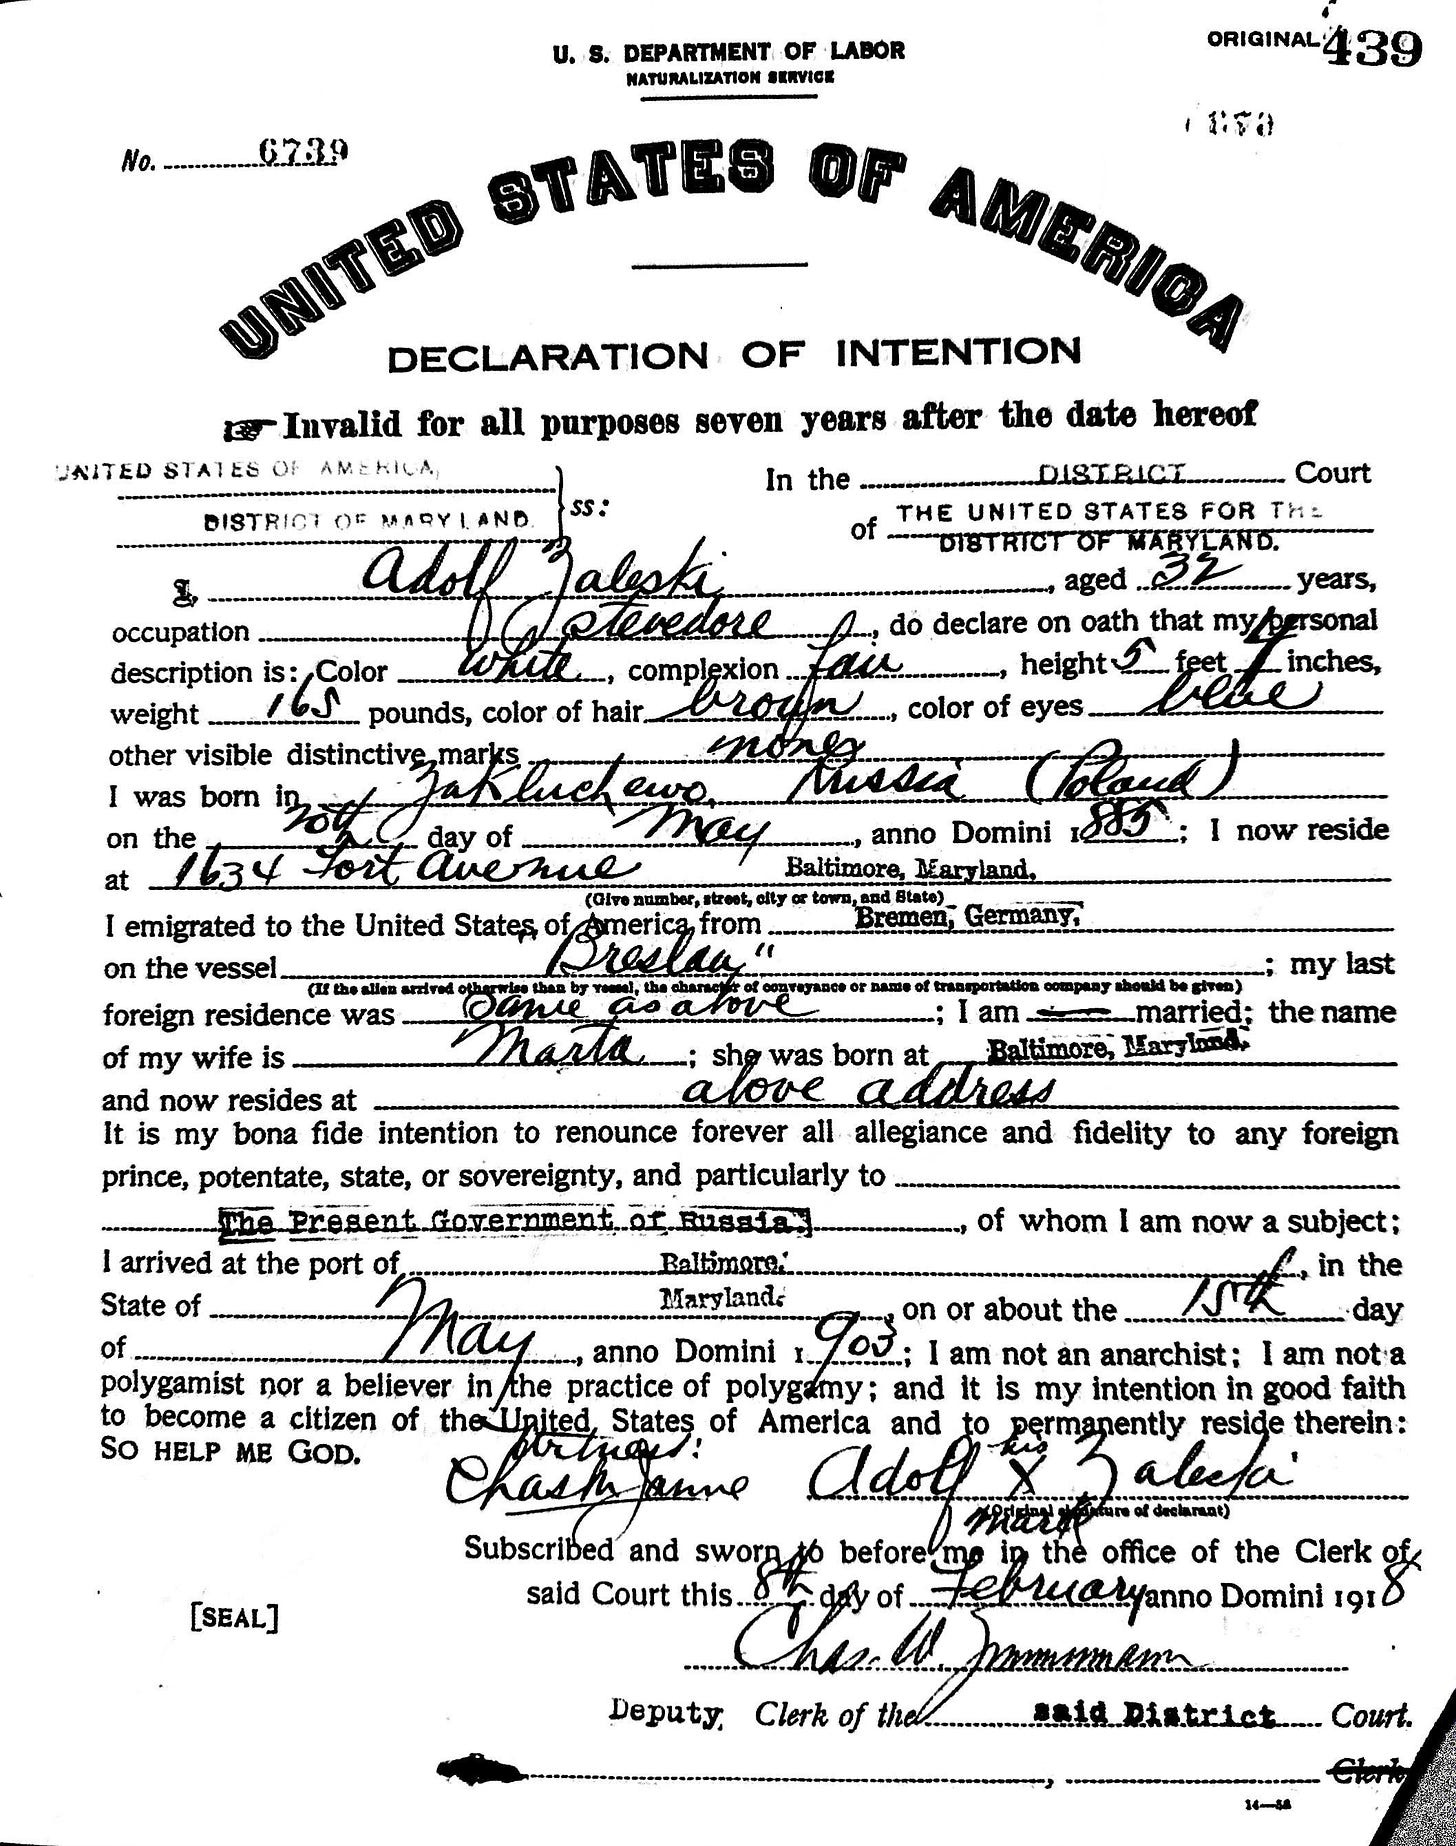 United States Naturalization Service Declaration of Intention document.